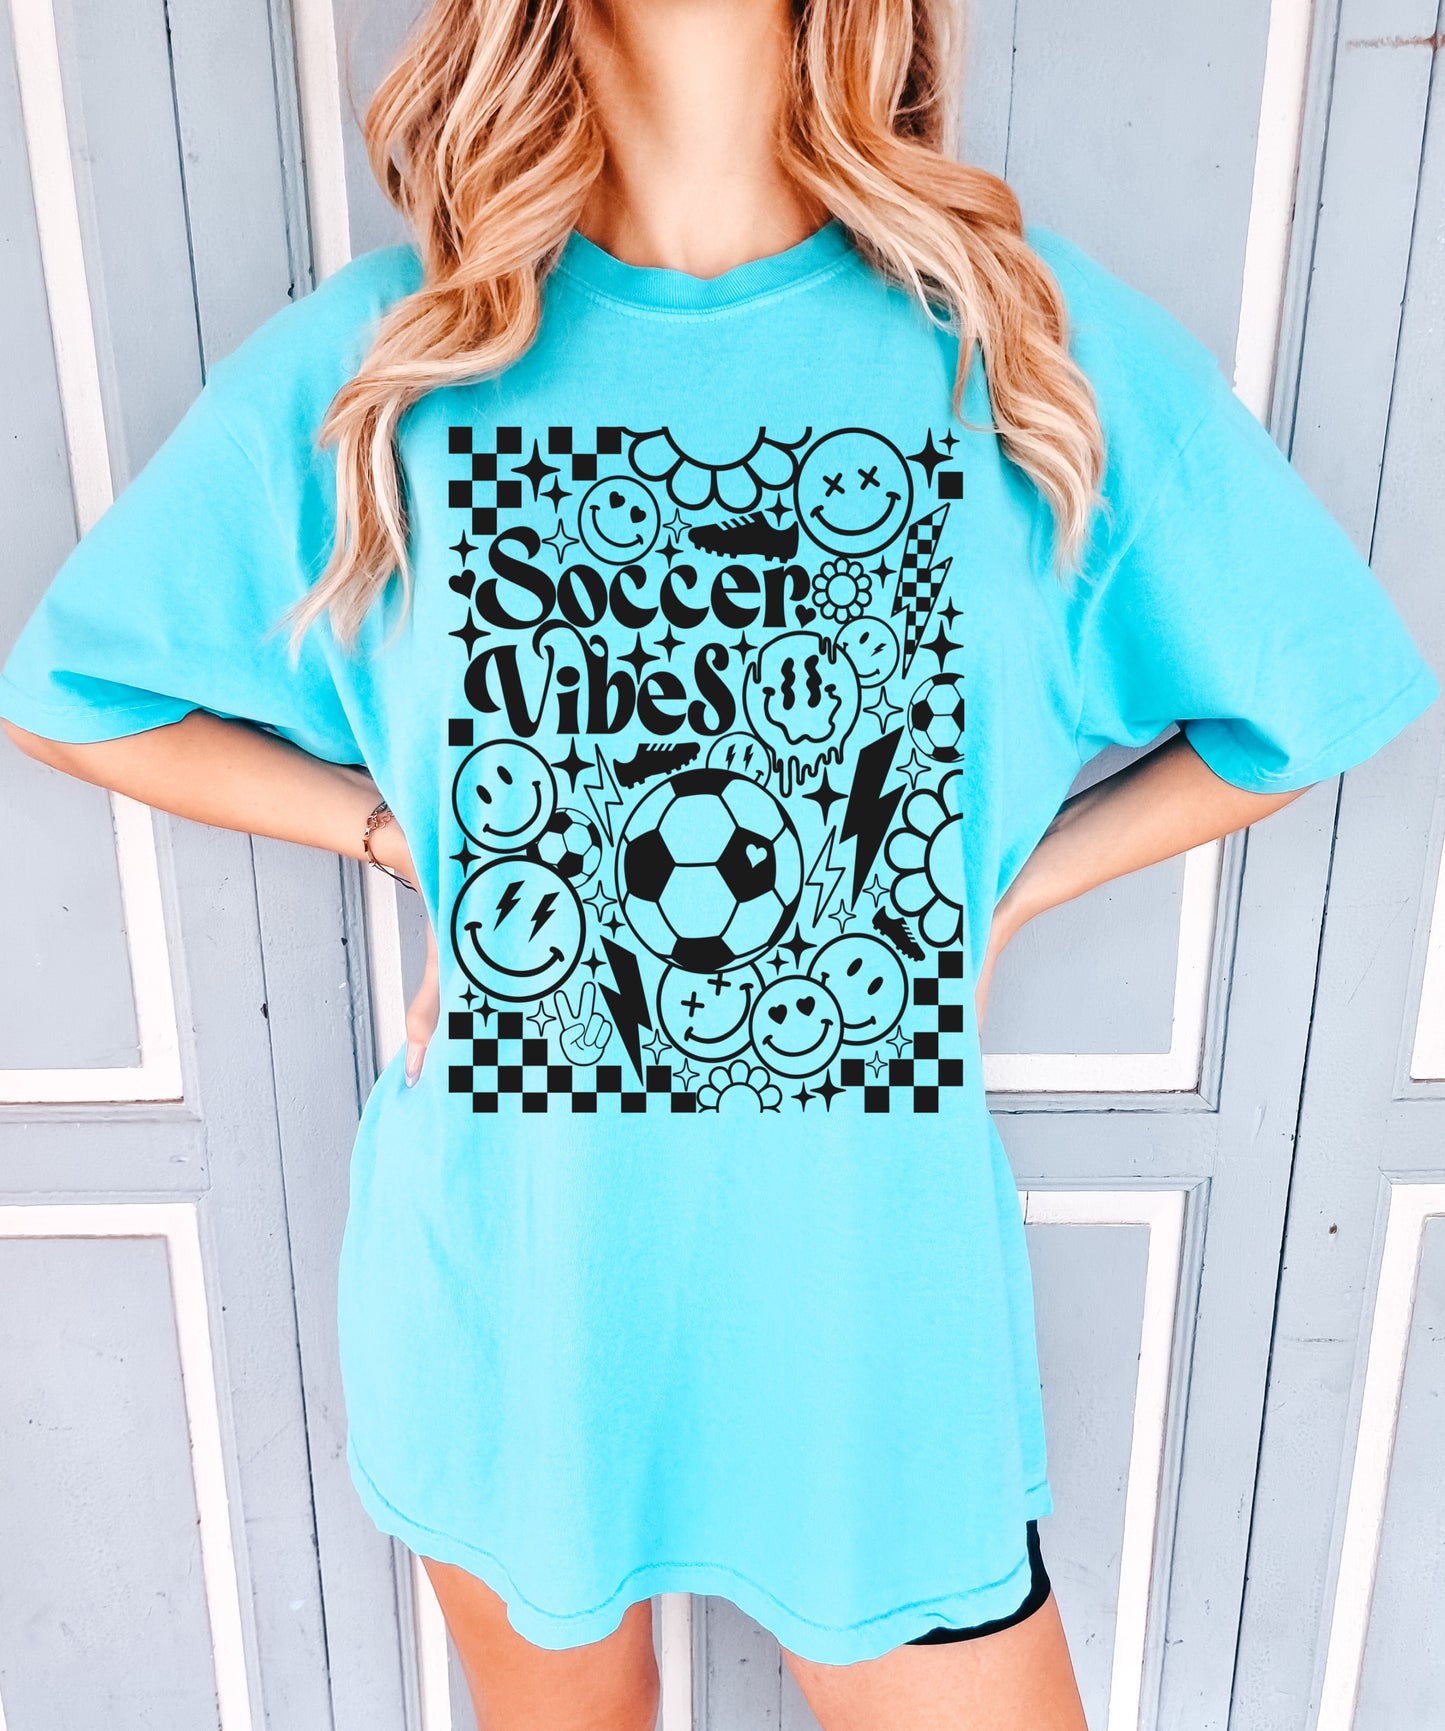 Soccer Vibes T-Shirt / Soccer Shirt / Bella Canvas or Comfort ColorsTee